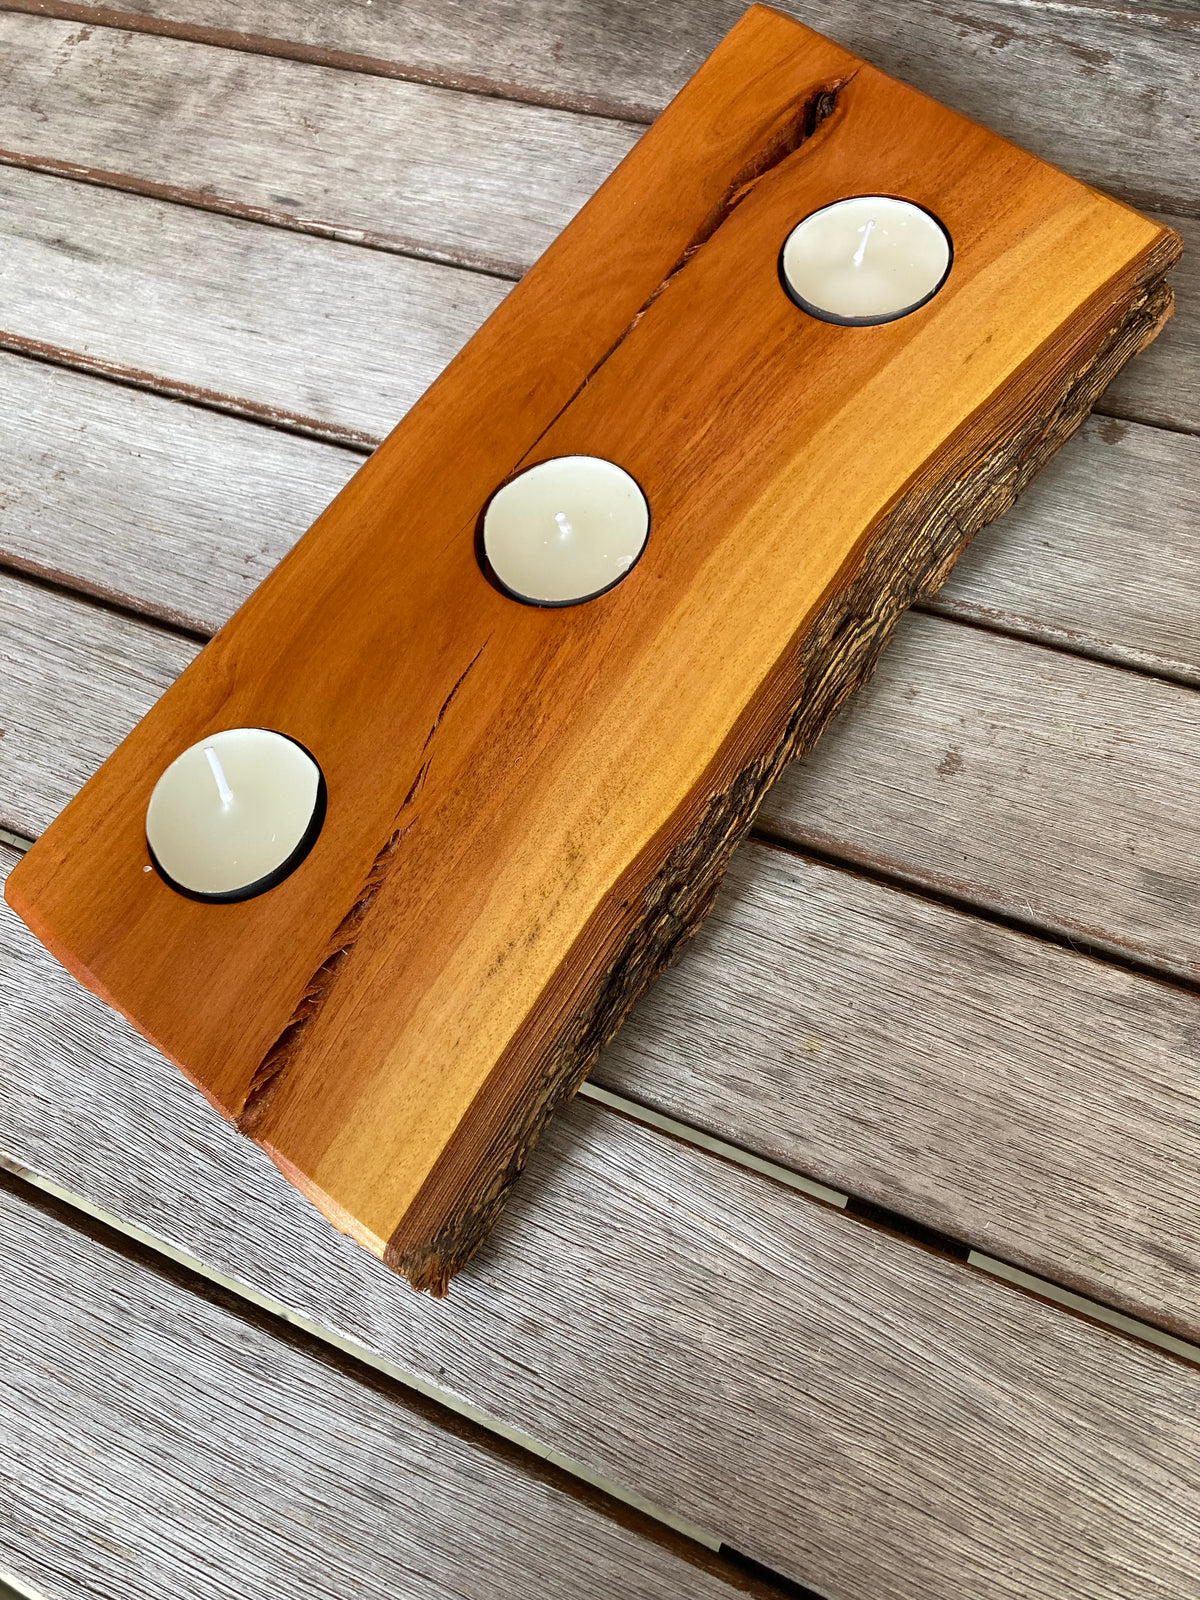 Timber candle holder NZ made